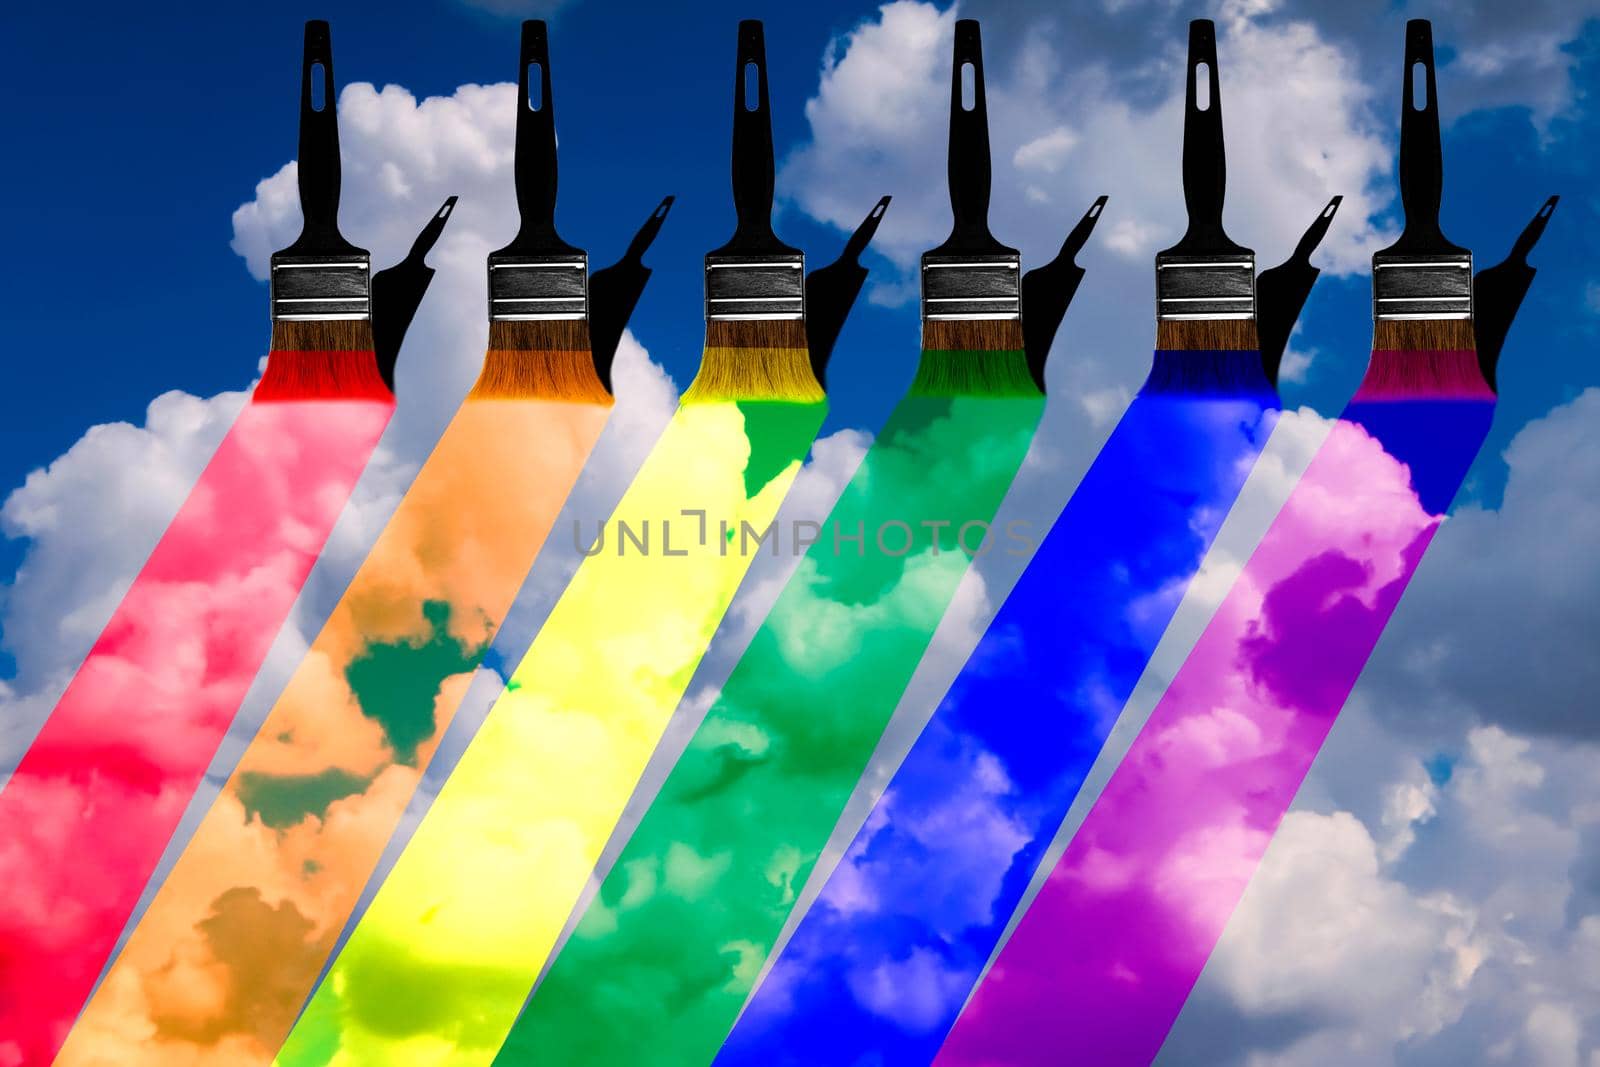 image of several shadow brushes painting rainbow colors in a cloudy blue sky